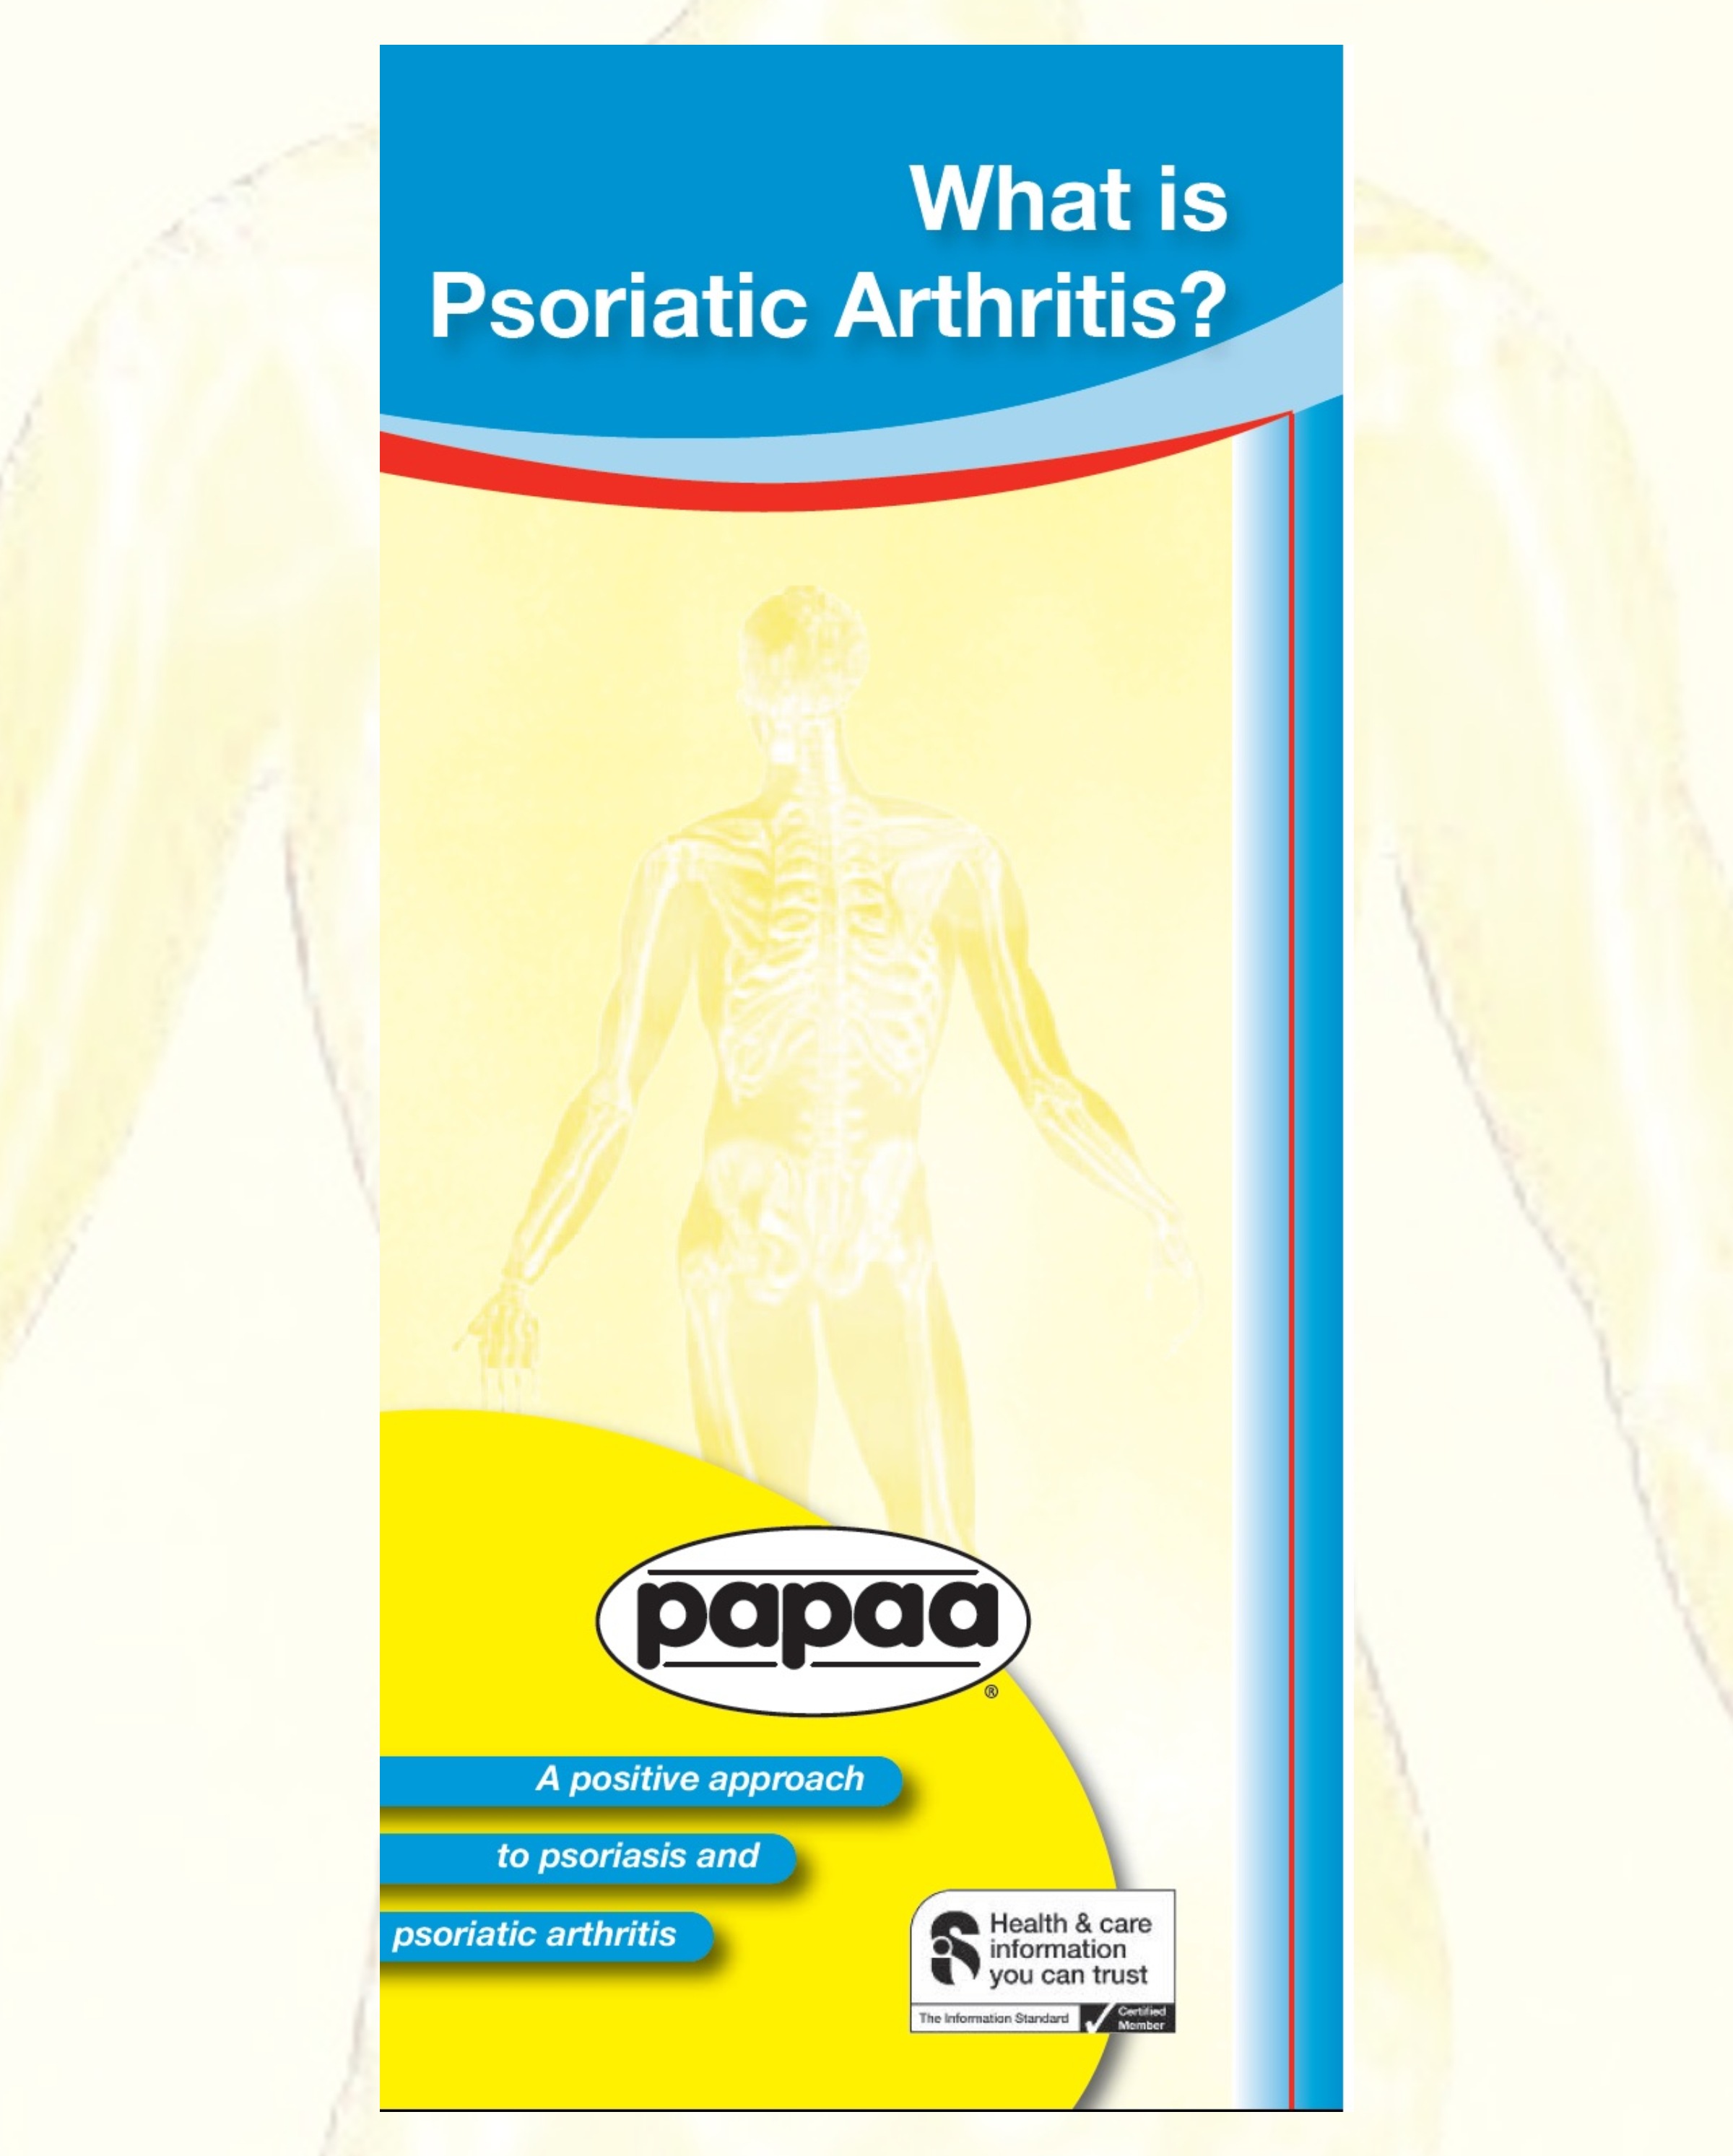 Psoriatic Arthritis Is An Inflammatory Joint Condition Associated With